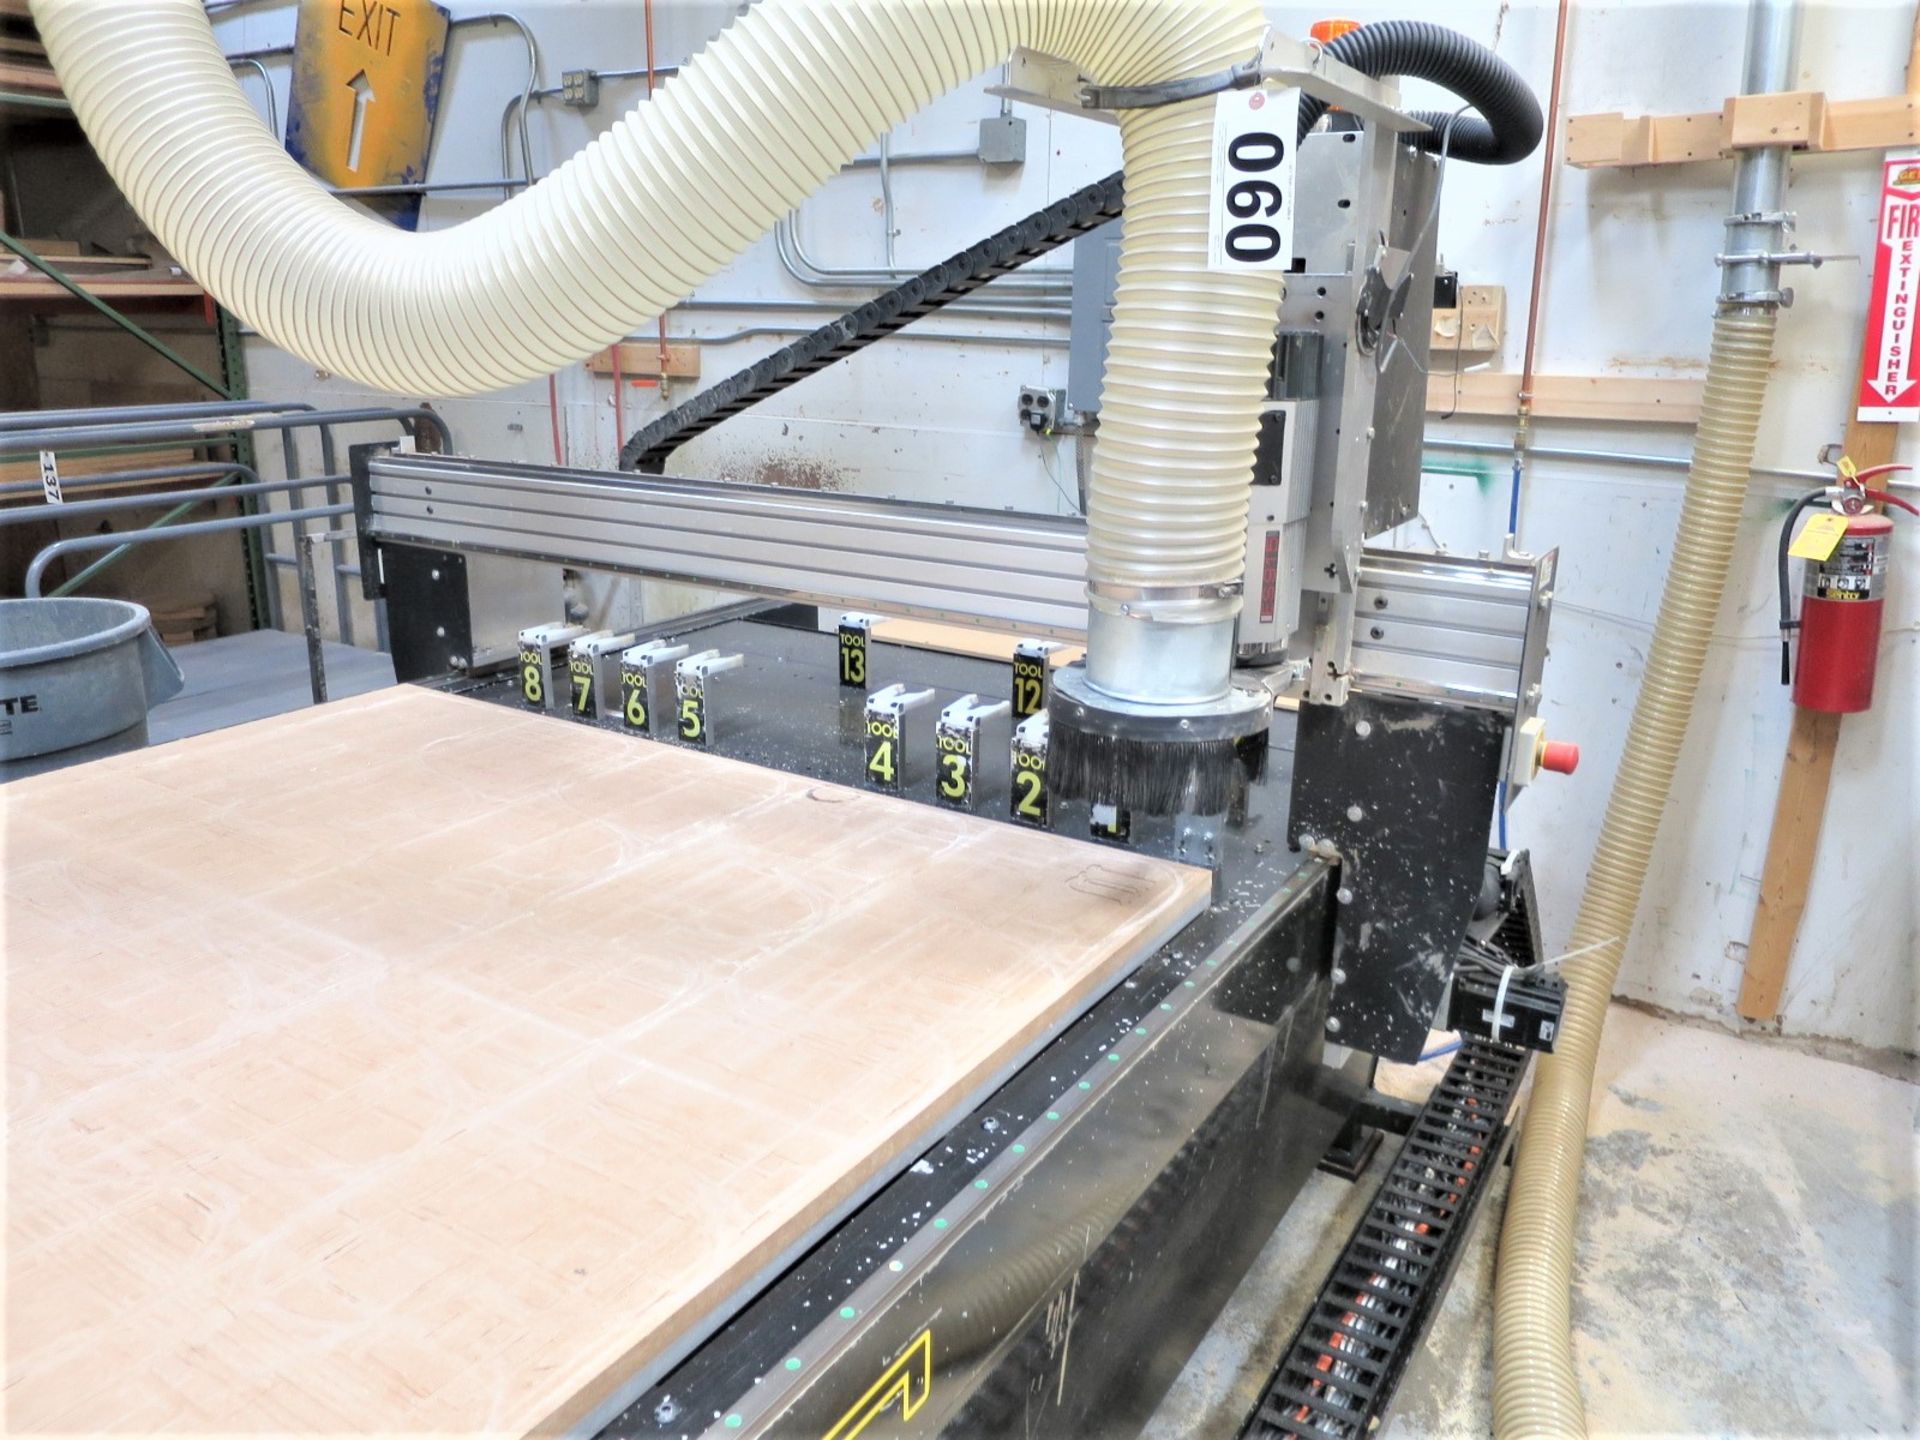 2013 EZ Router 5' x 10' Scorpion CNC Router with 10hp Becker pump, SN SC082713SCAS4B641V - Image 2 of 15